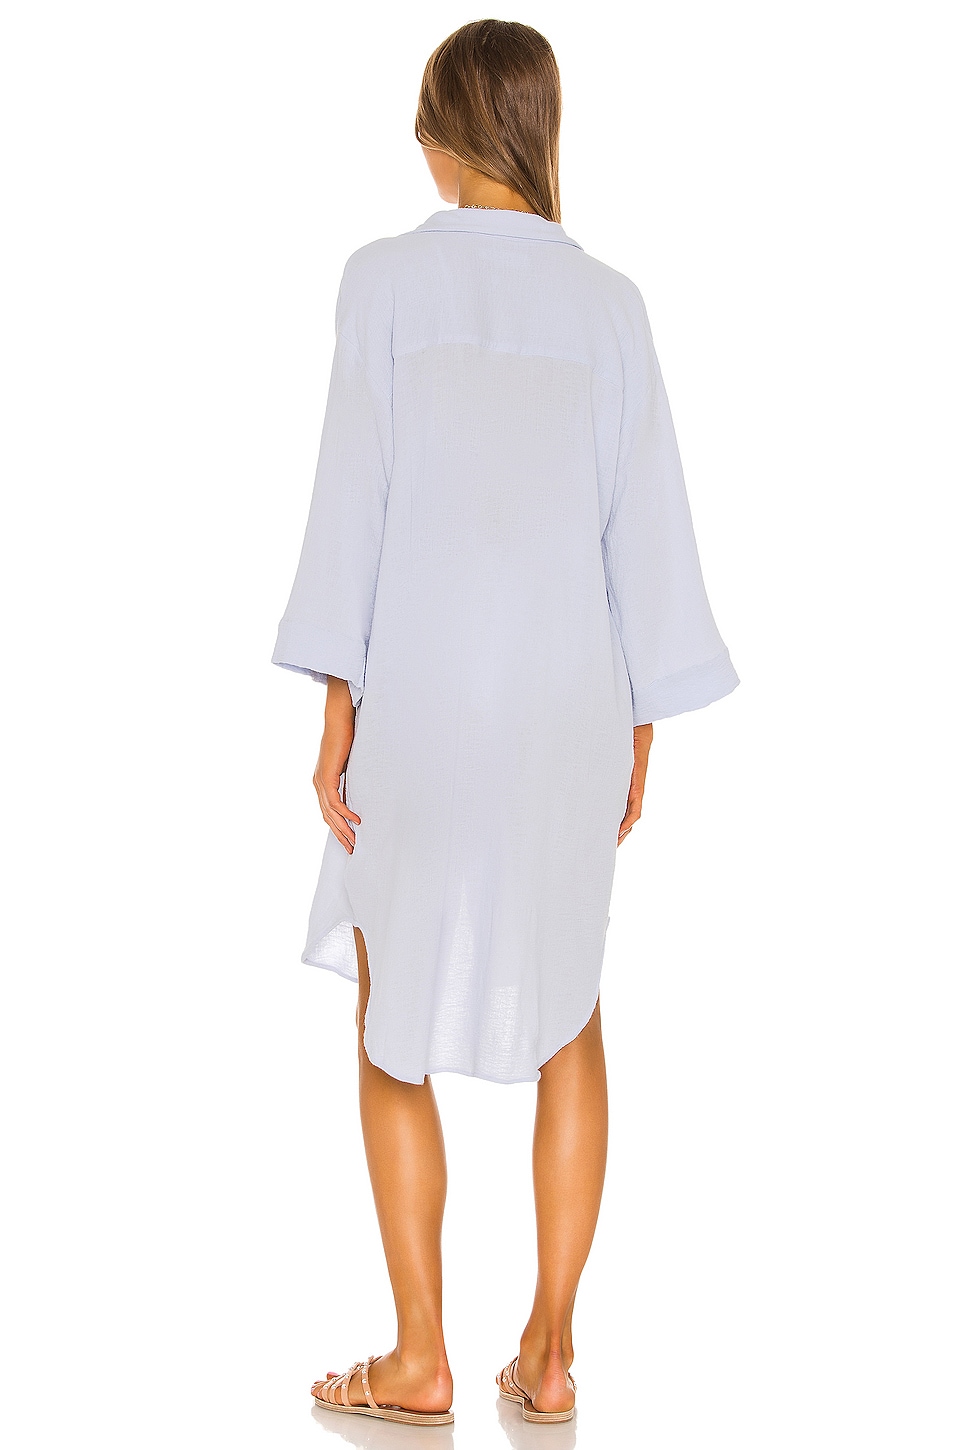 Seafolly Oversize Beach Cover Up in Powder Blue | REVOLVE